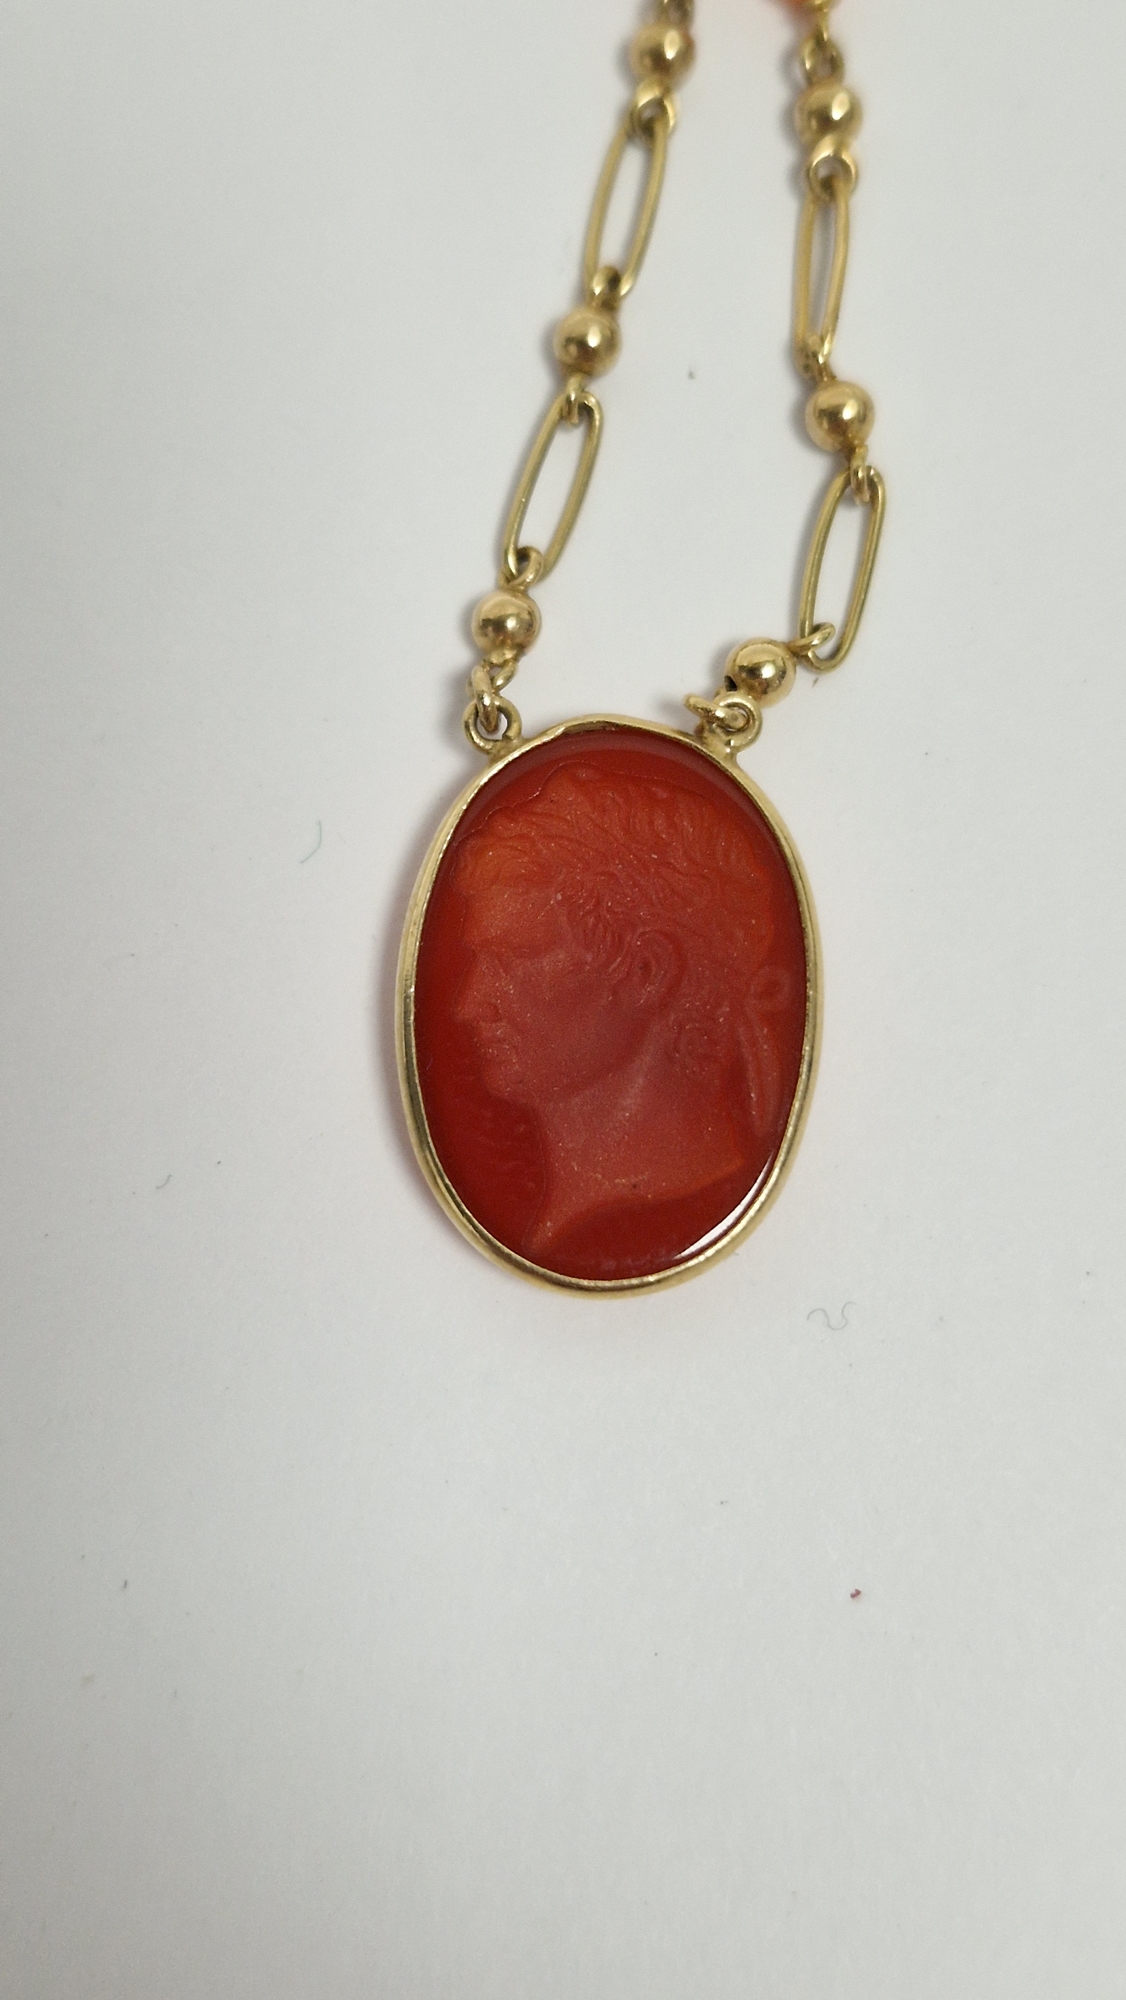 9ct gold and cornelian chain and cornelian cameo pendant and a 9ct gold elongated link chain - Image 2 of 6